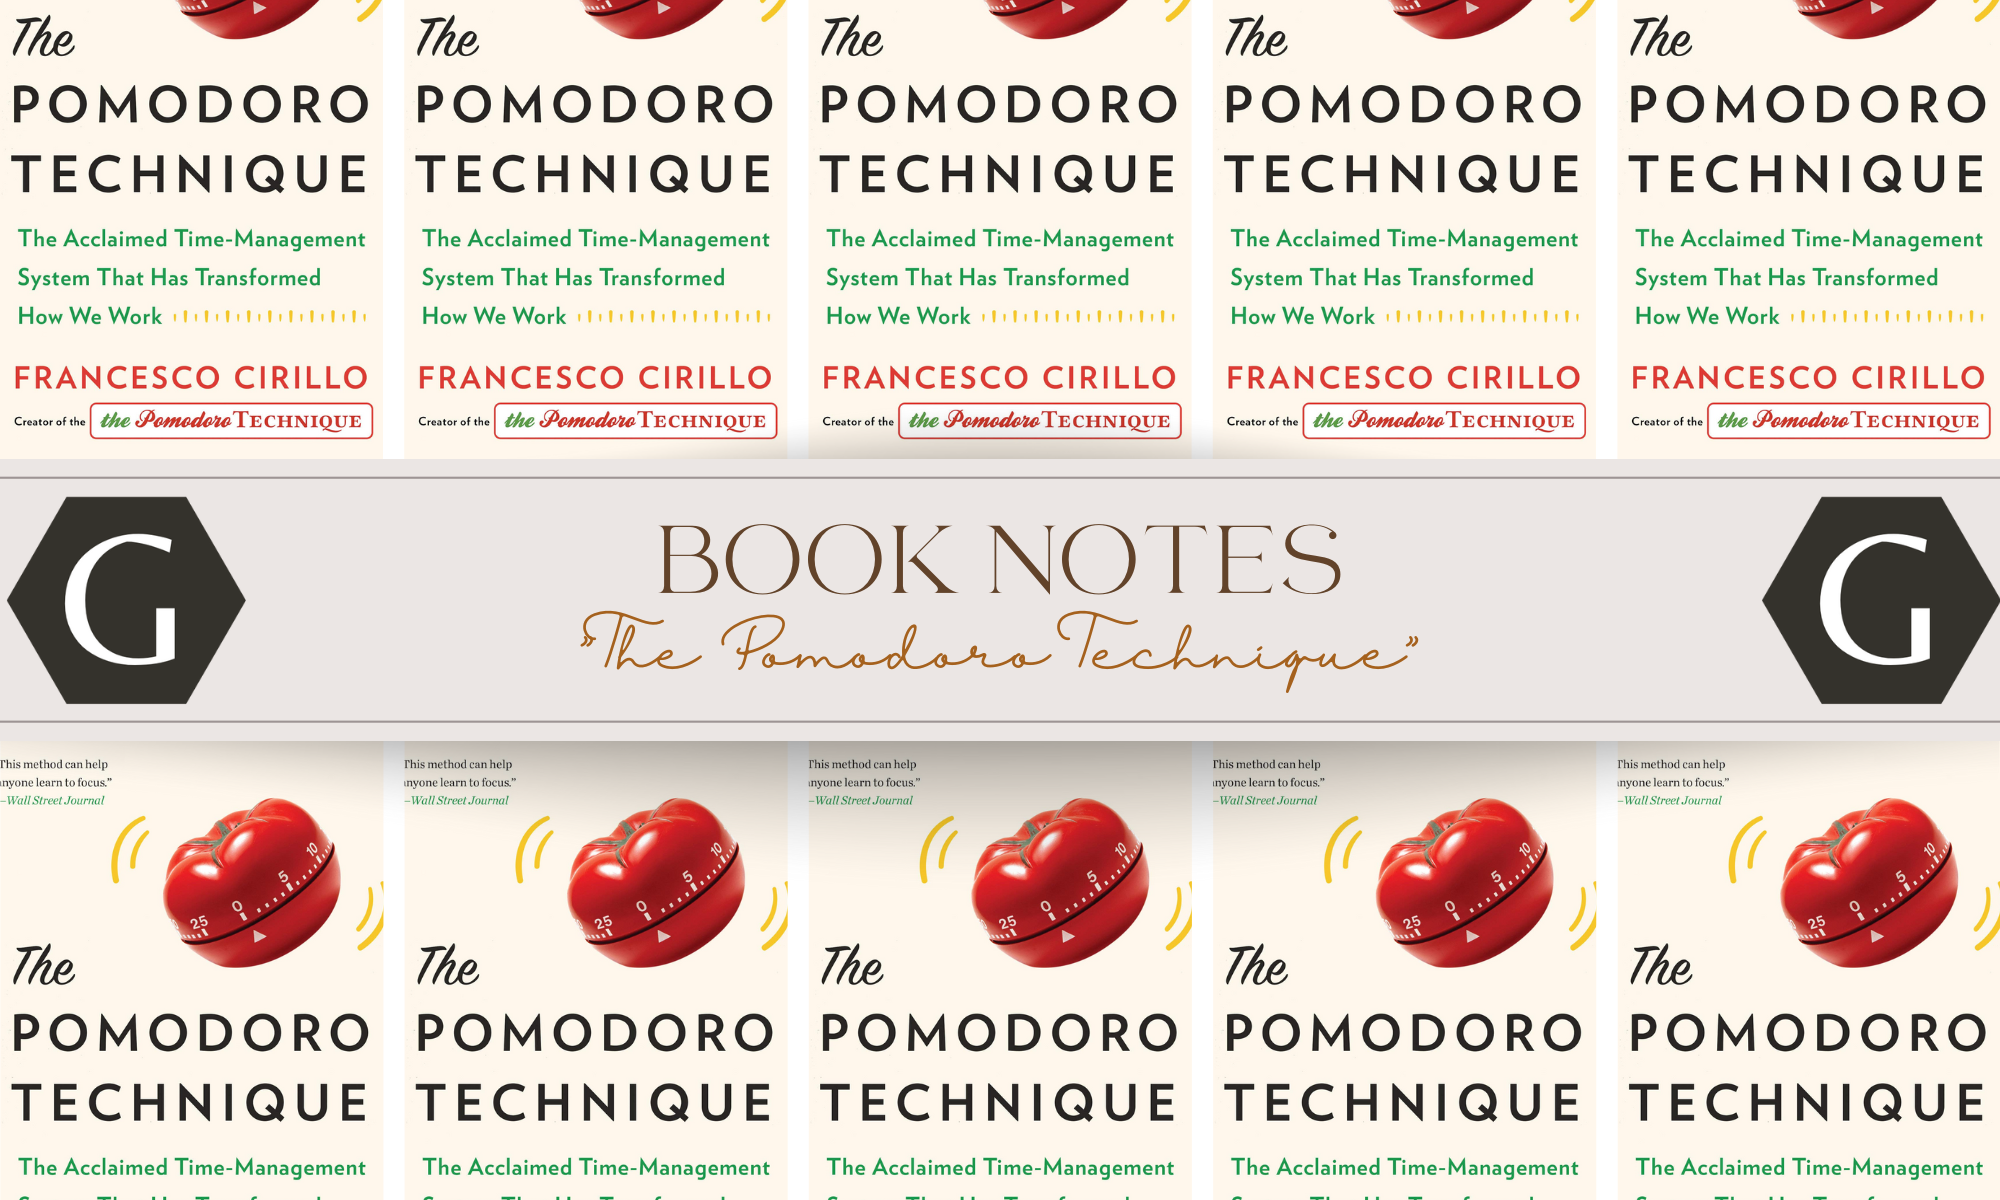 The Pomodoro Technique: The Life-Changing Time-Management System